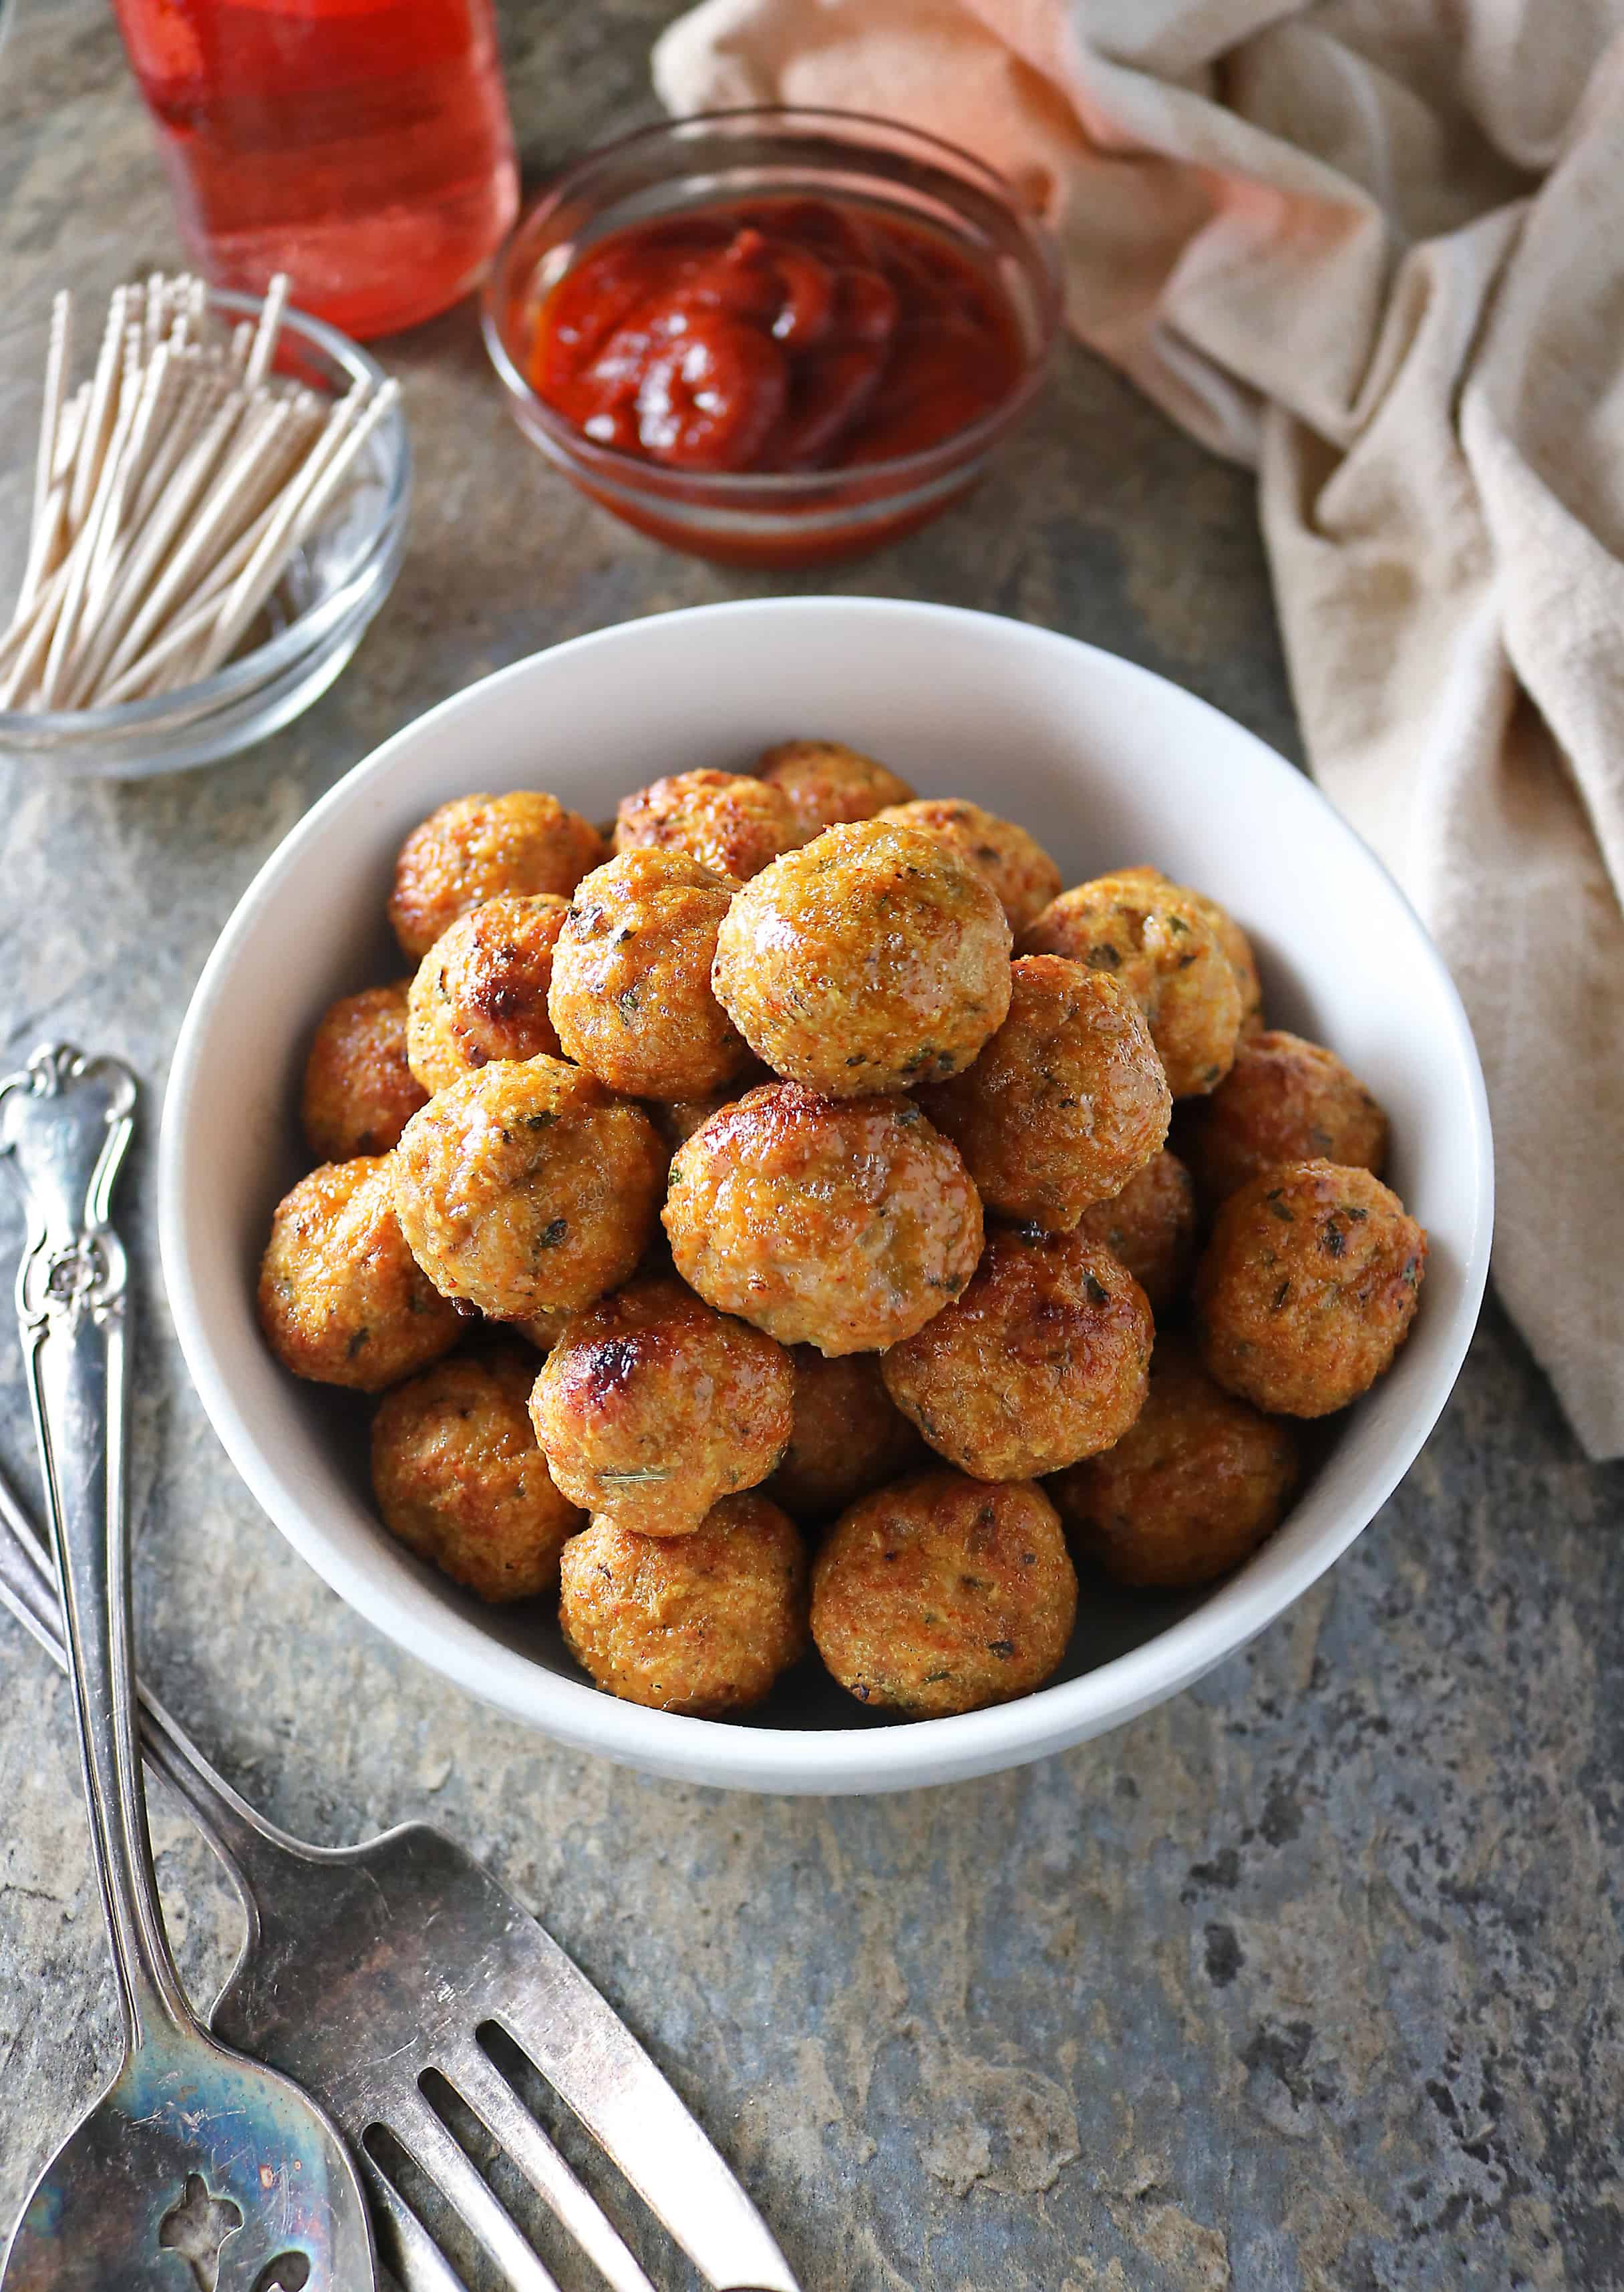 These Gluten-free, Baked, Spicy Chicken Meatballs are so easy to make and a...